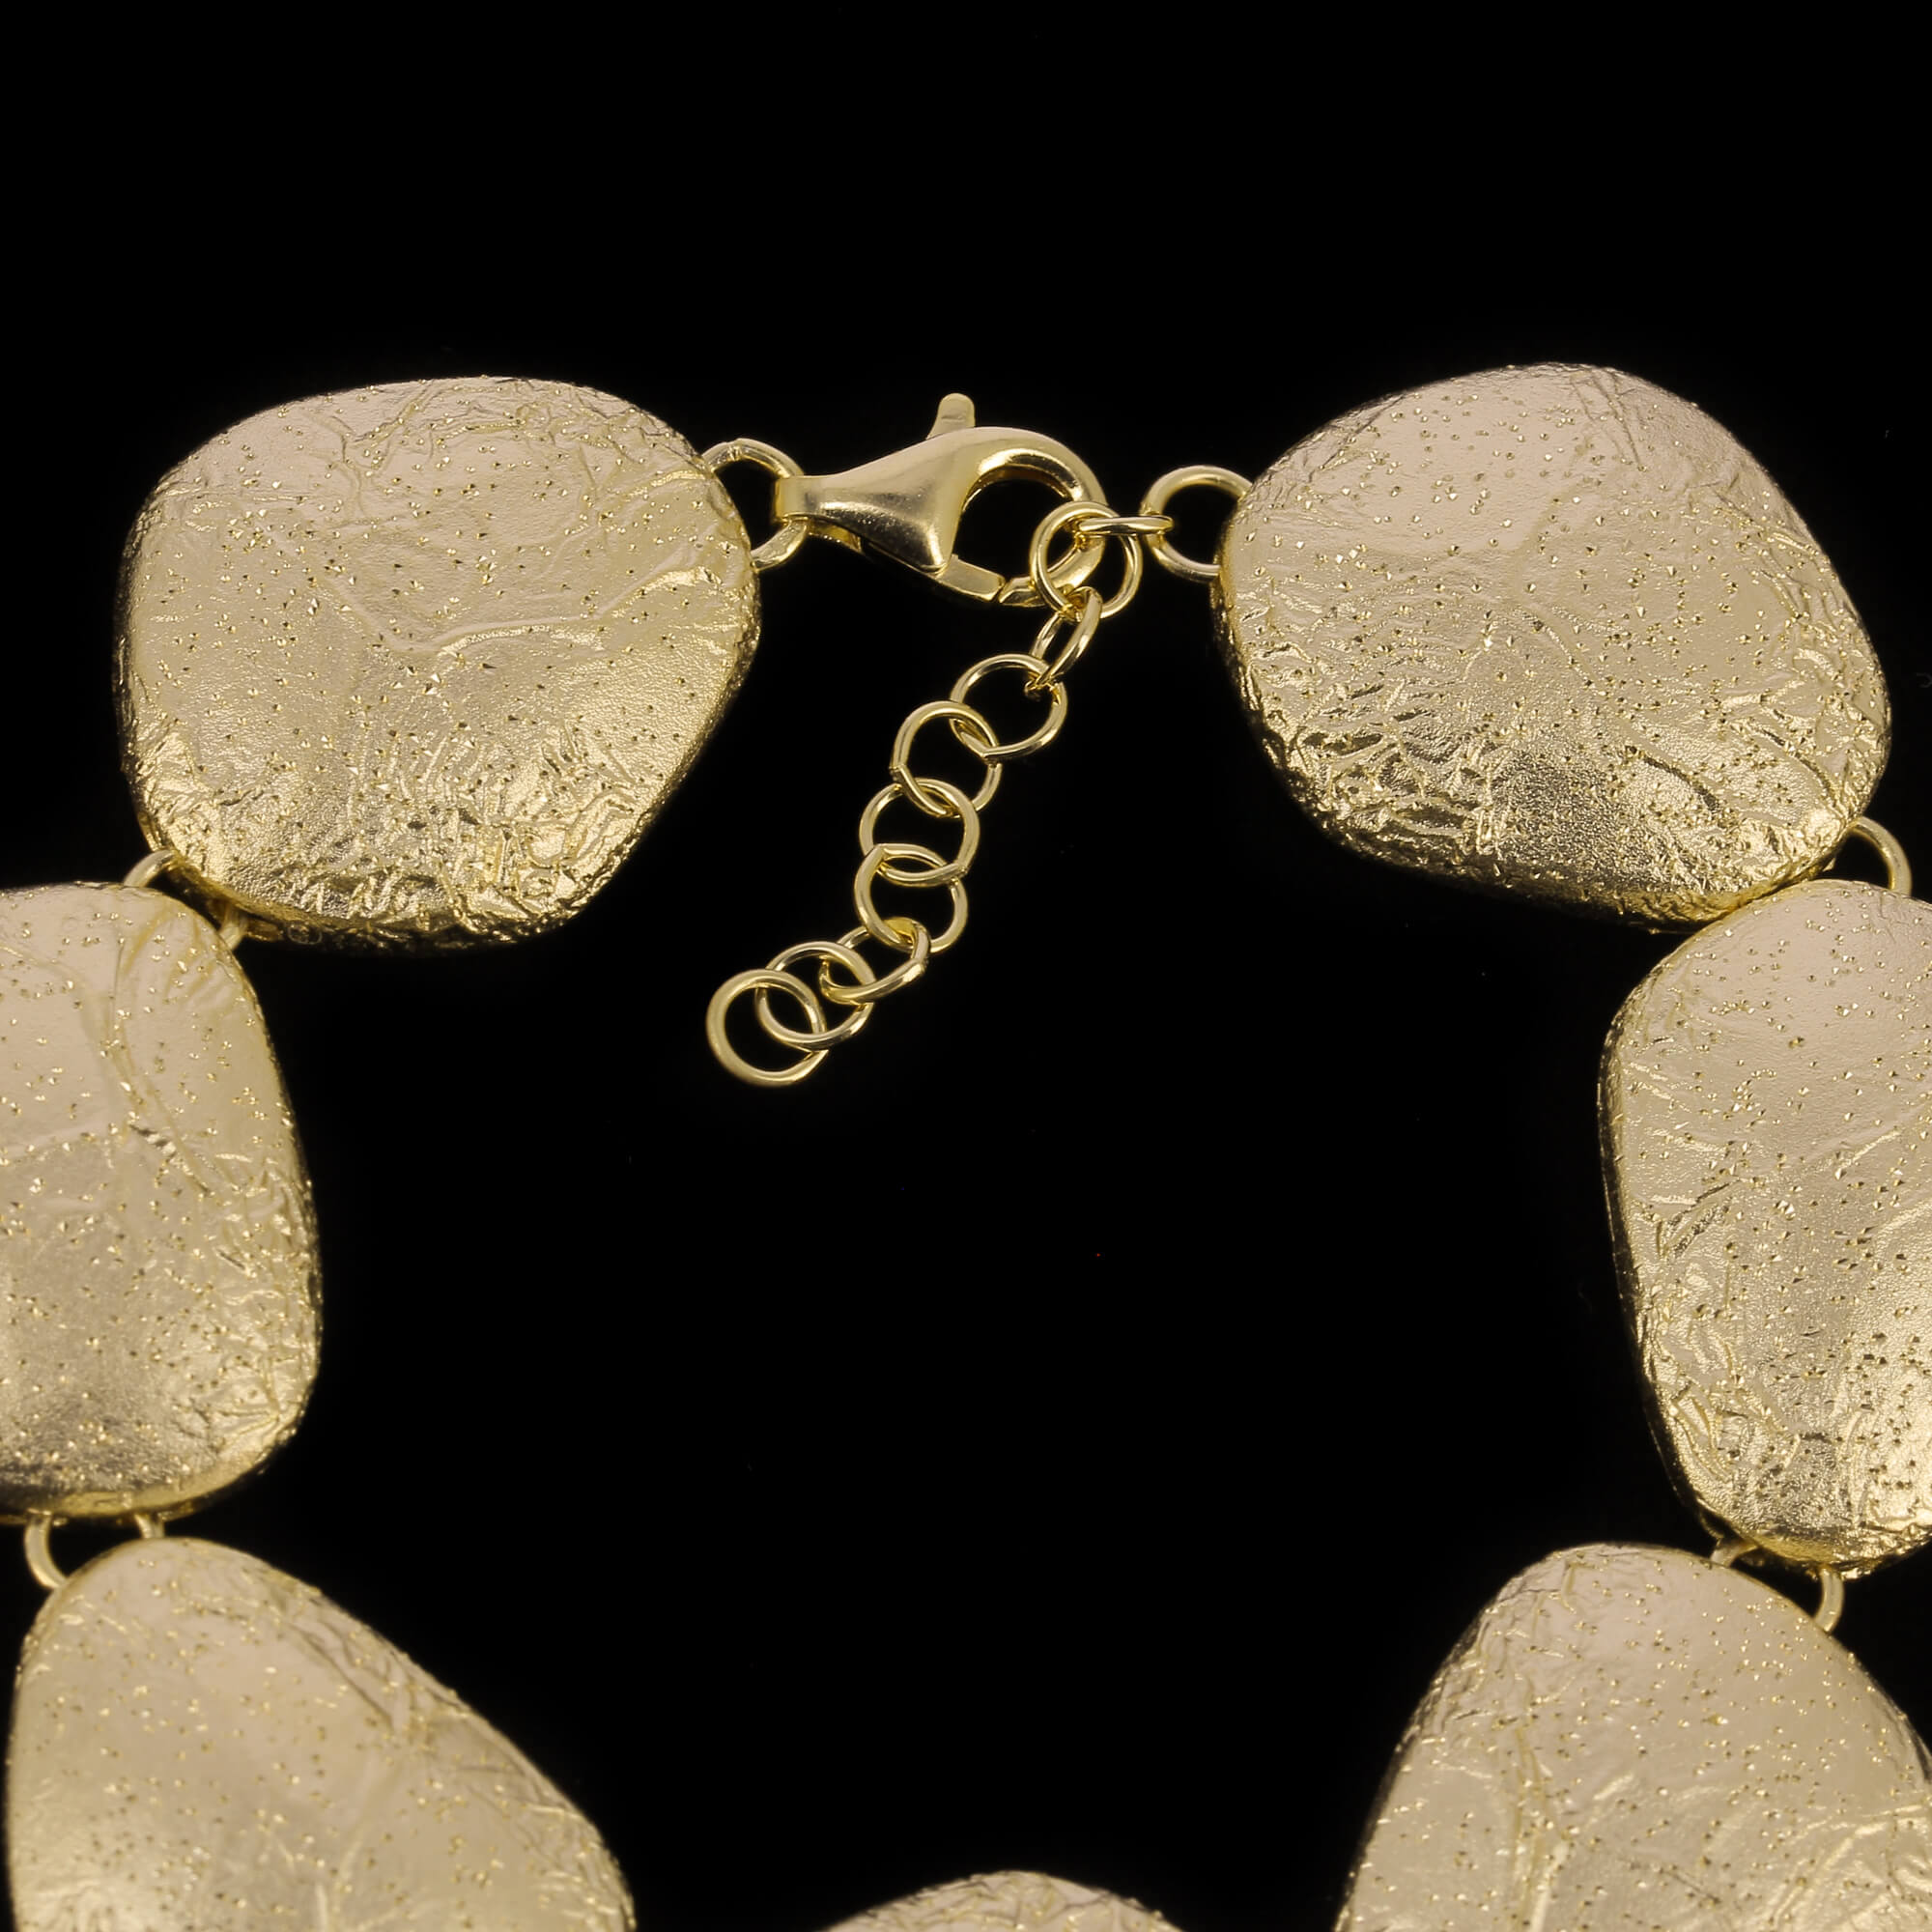 Gold-plated and diamond bracelet with coffee bean design